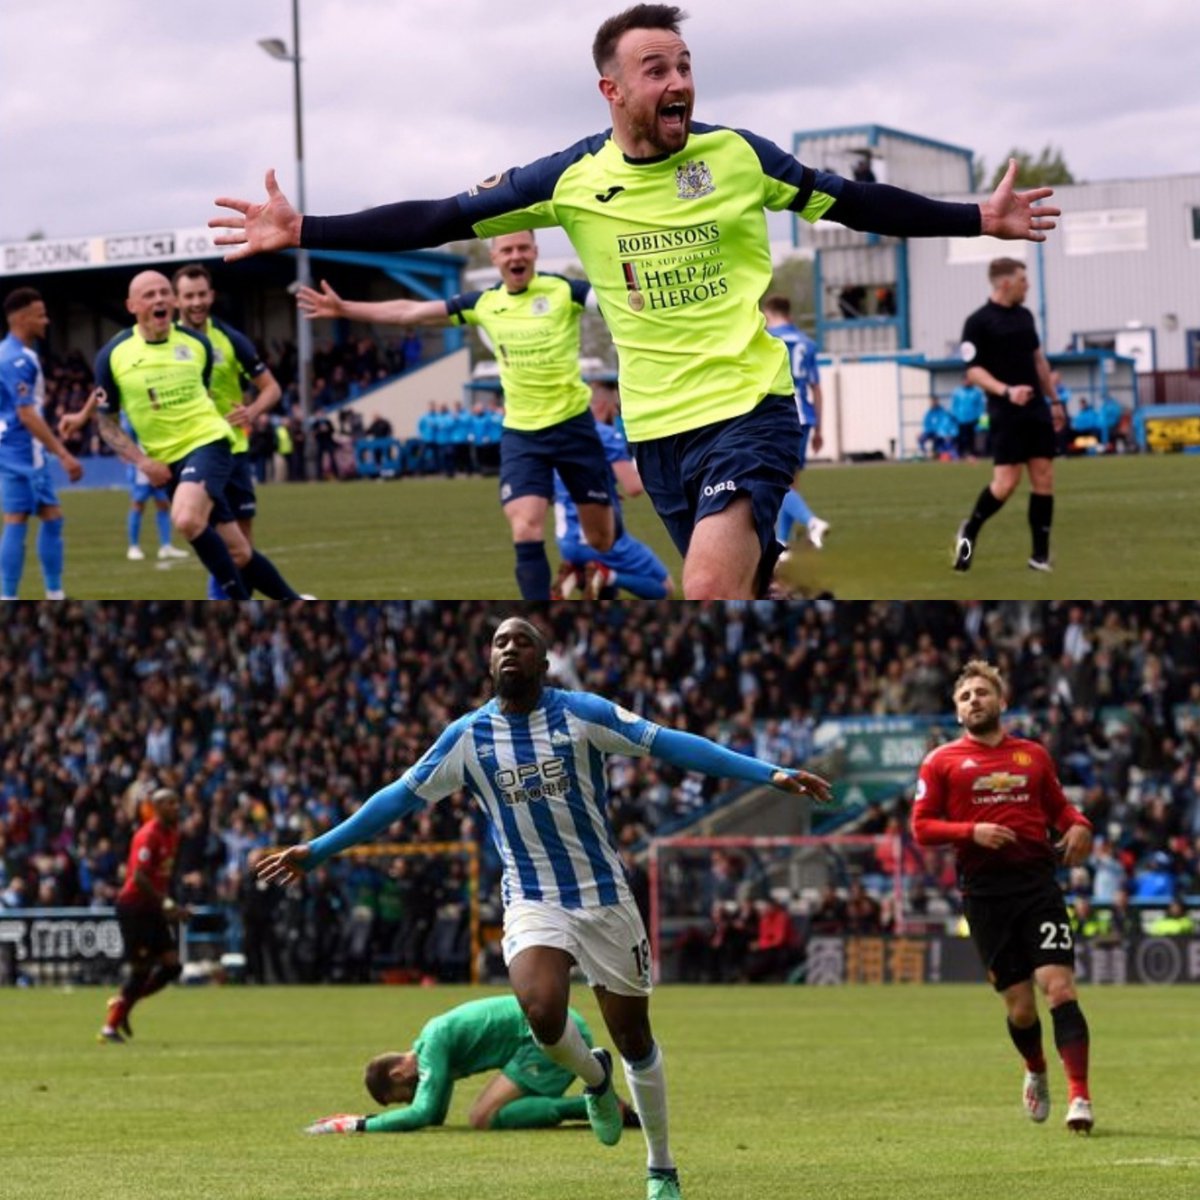 A week after the MIGHTY COUNTY won the National League North with a 3-0 win at Nuneaton, Huddersfield Town drew 1-1 at home with Manchester United in the Premier League. Next season, they'll face each other in League One 🙌🎩 #stockportcounty #HTAFC